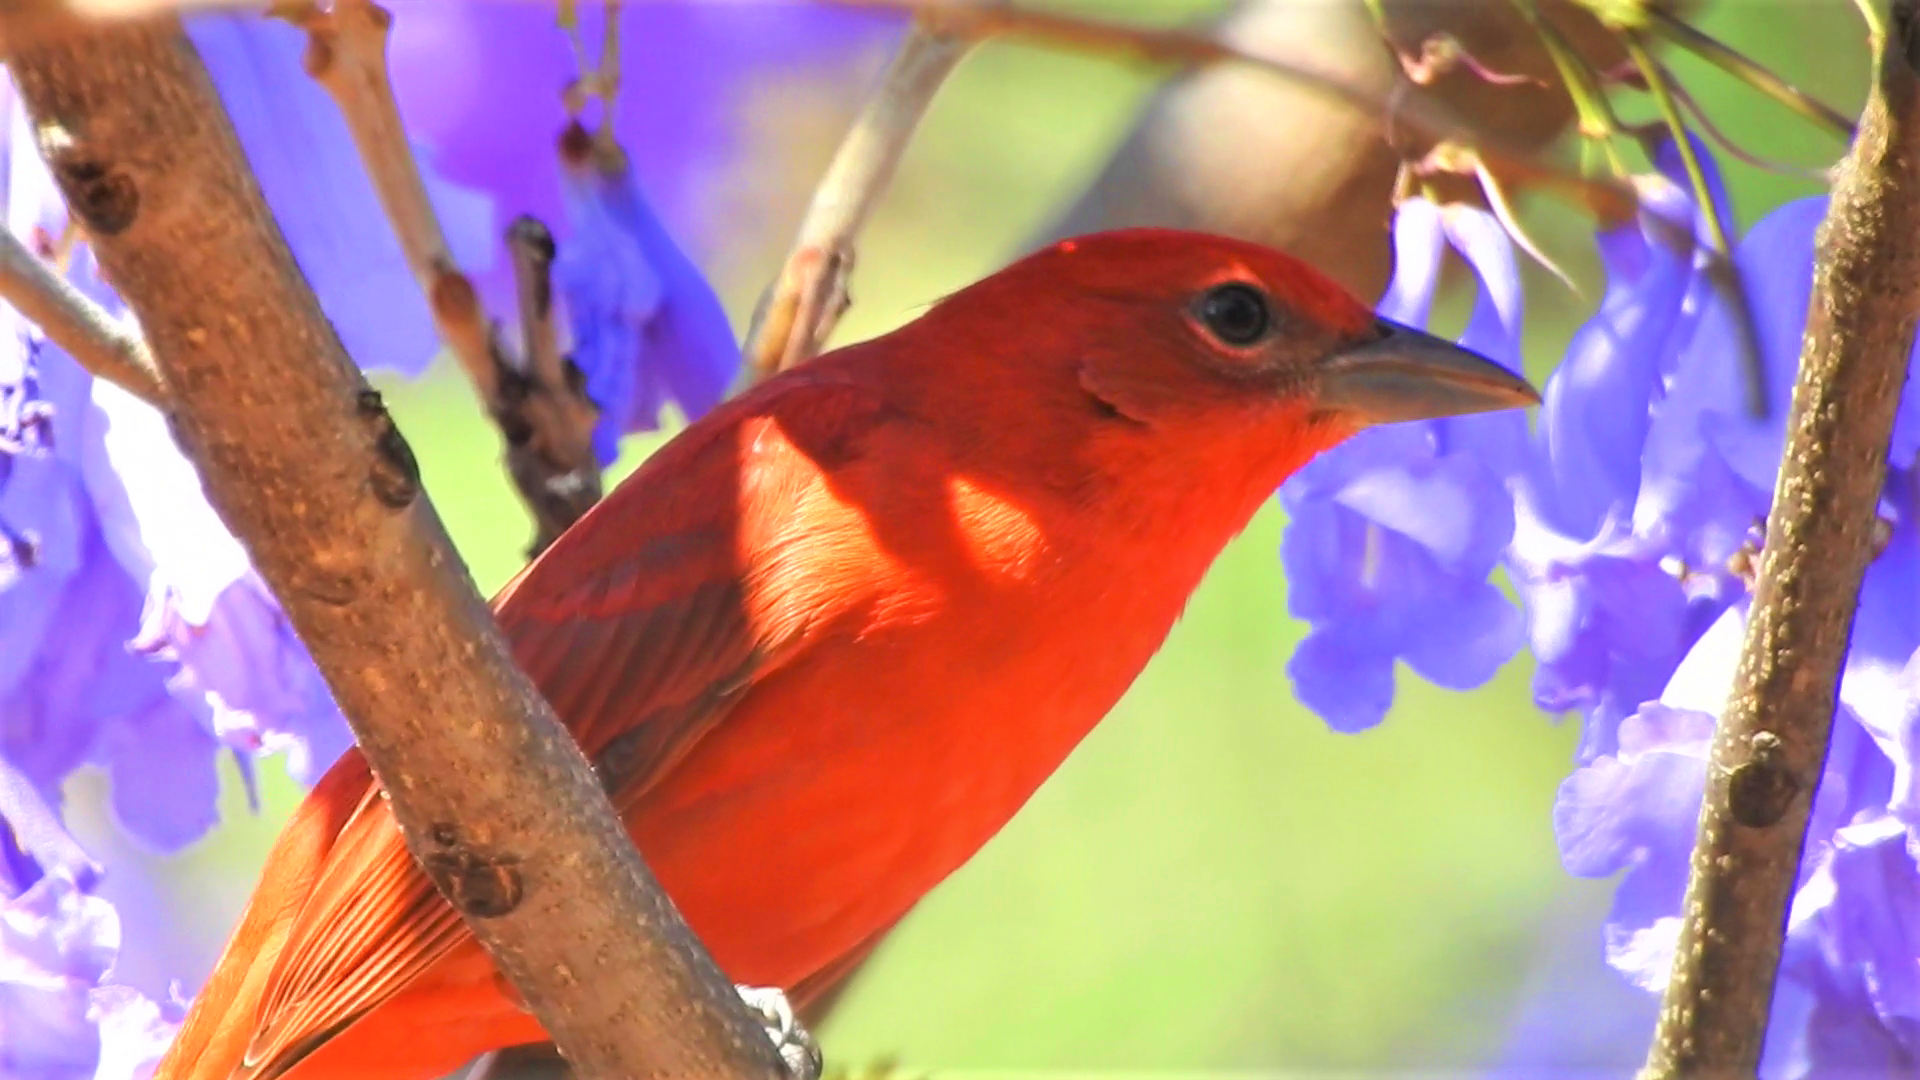 Adult male Summer Tanager